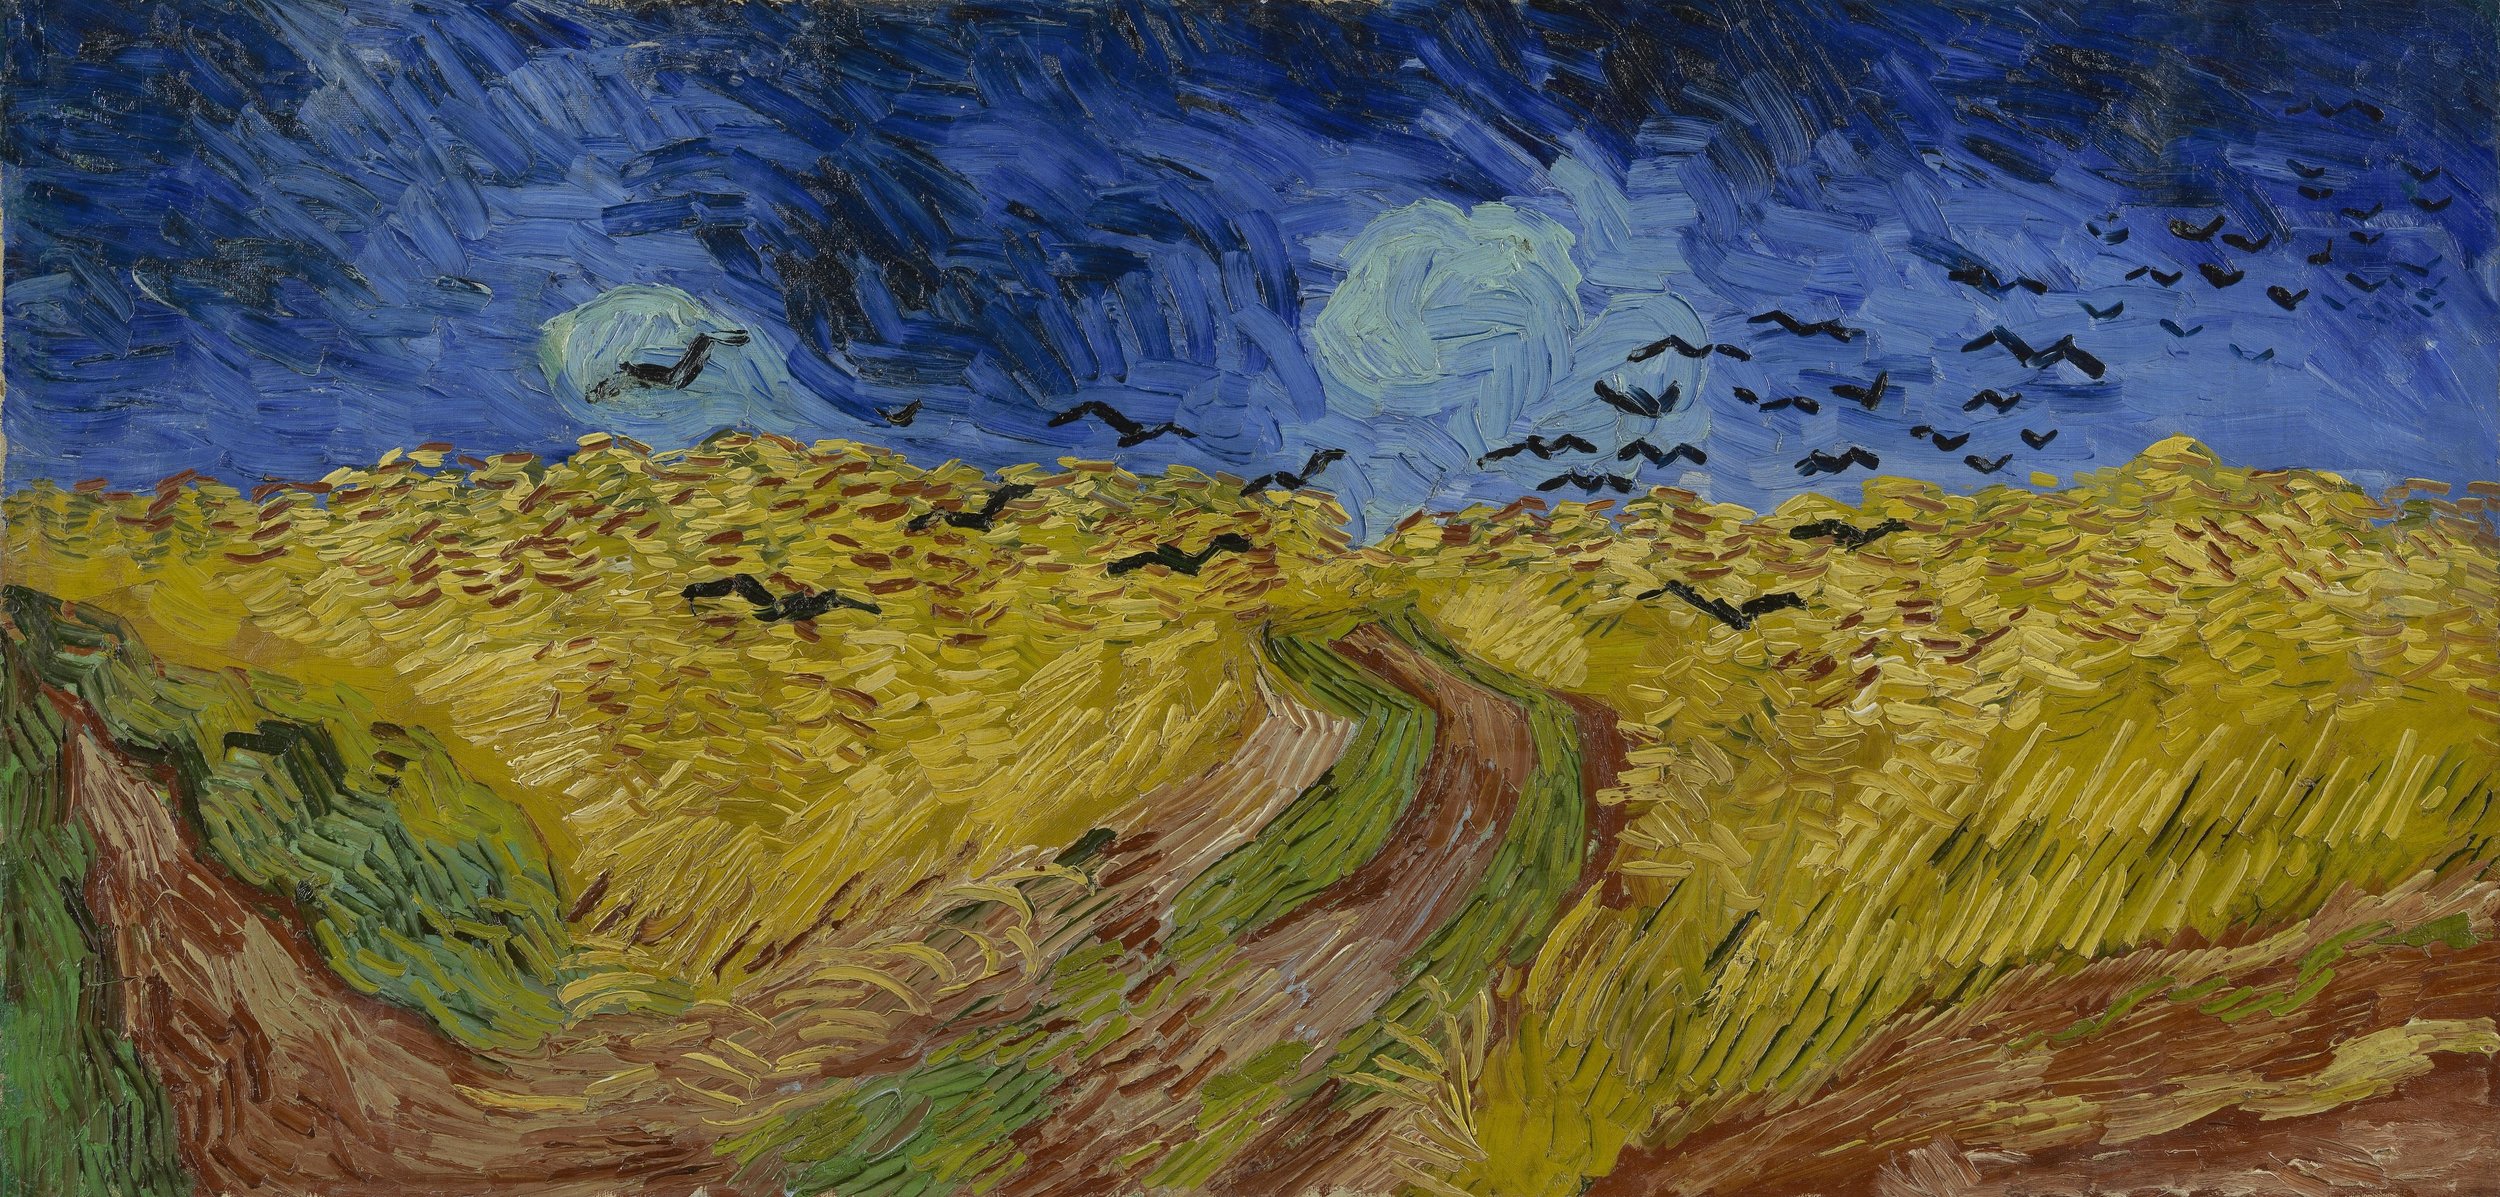 Wheatfield with Crows 1890